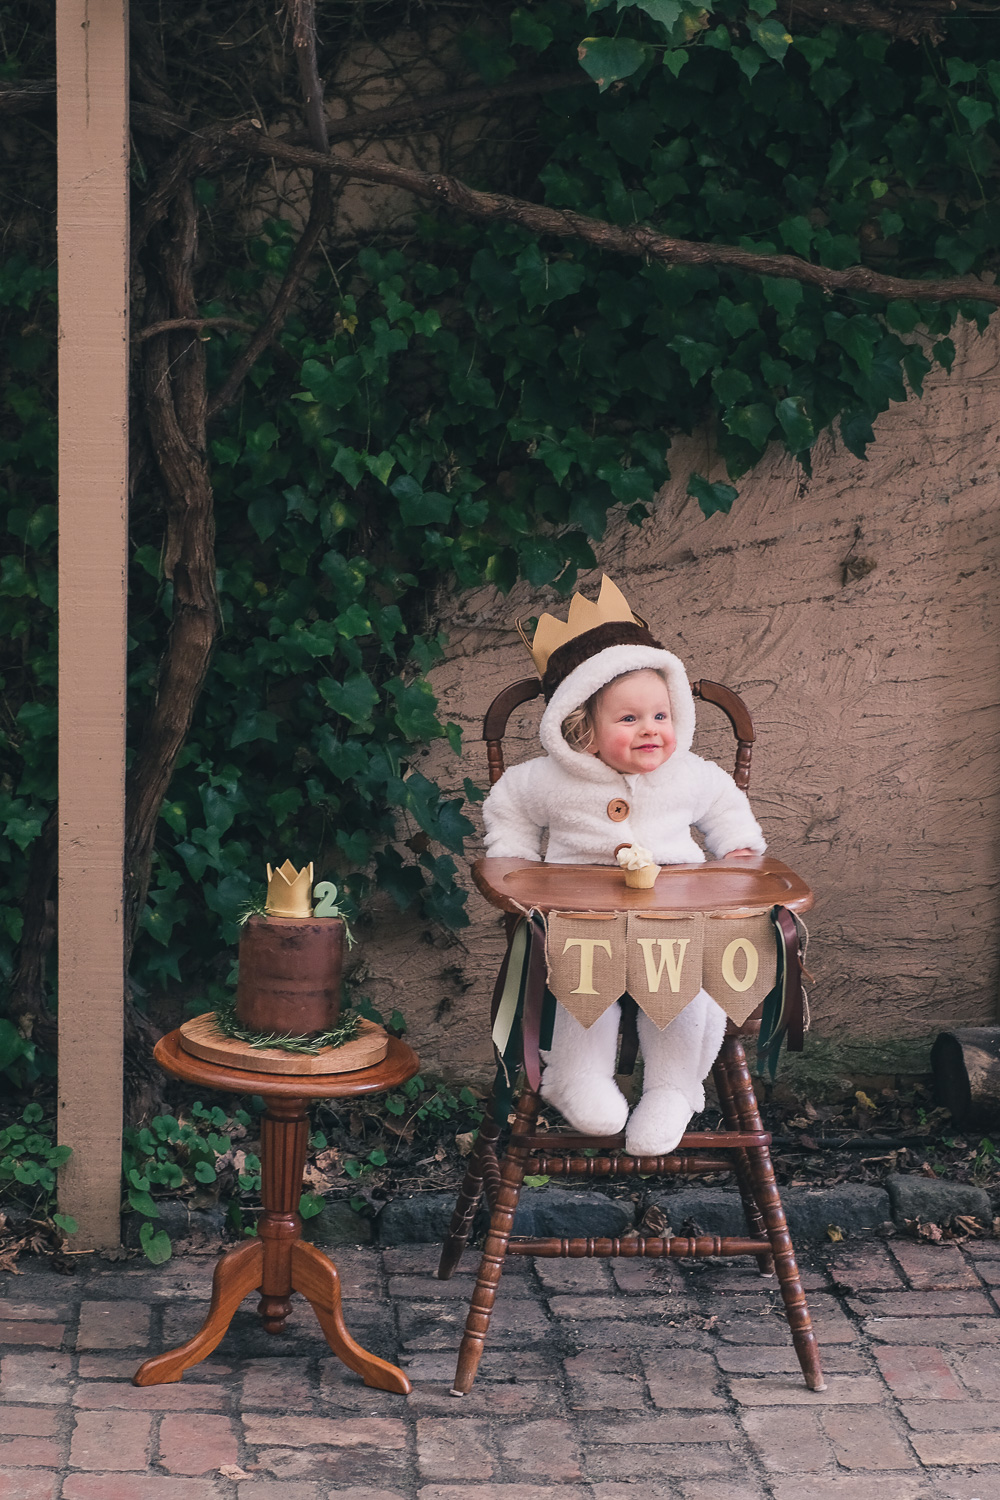 Child wearing Where The Wild Things Are party costume sits in a vintage high chair next to birthday cake